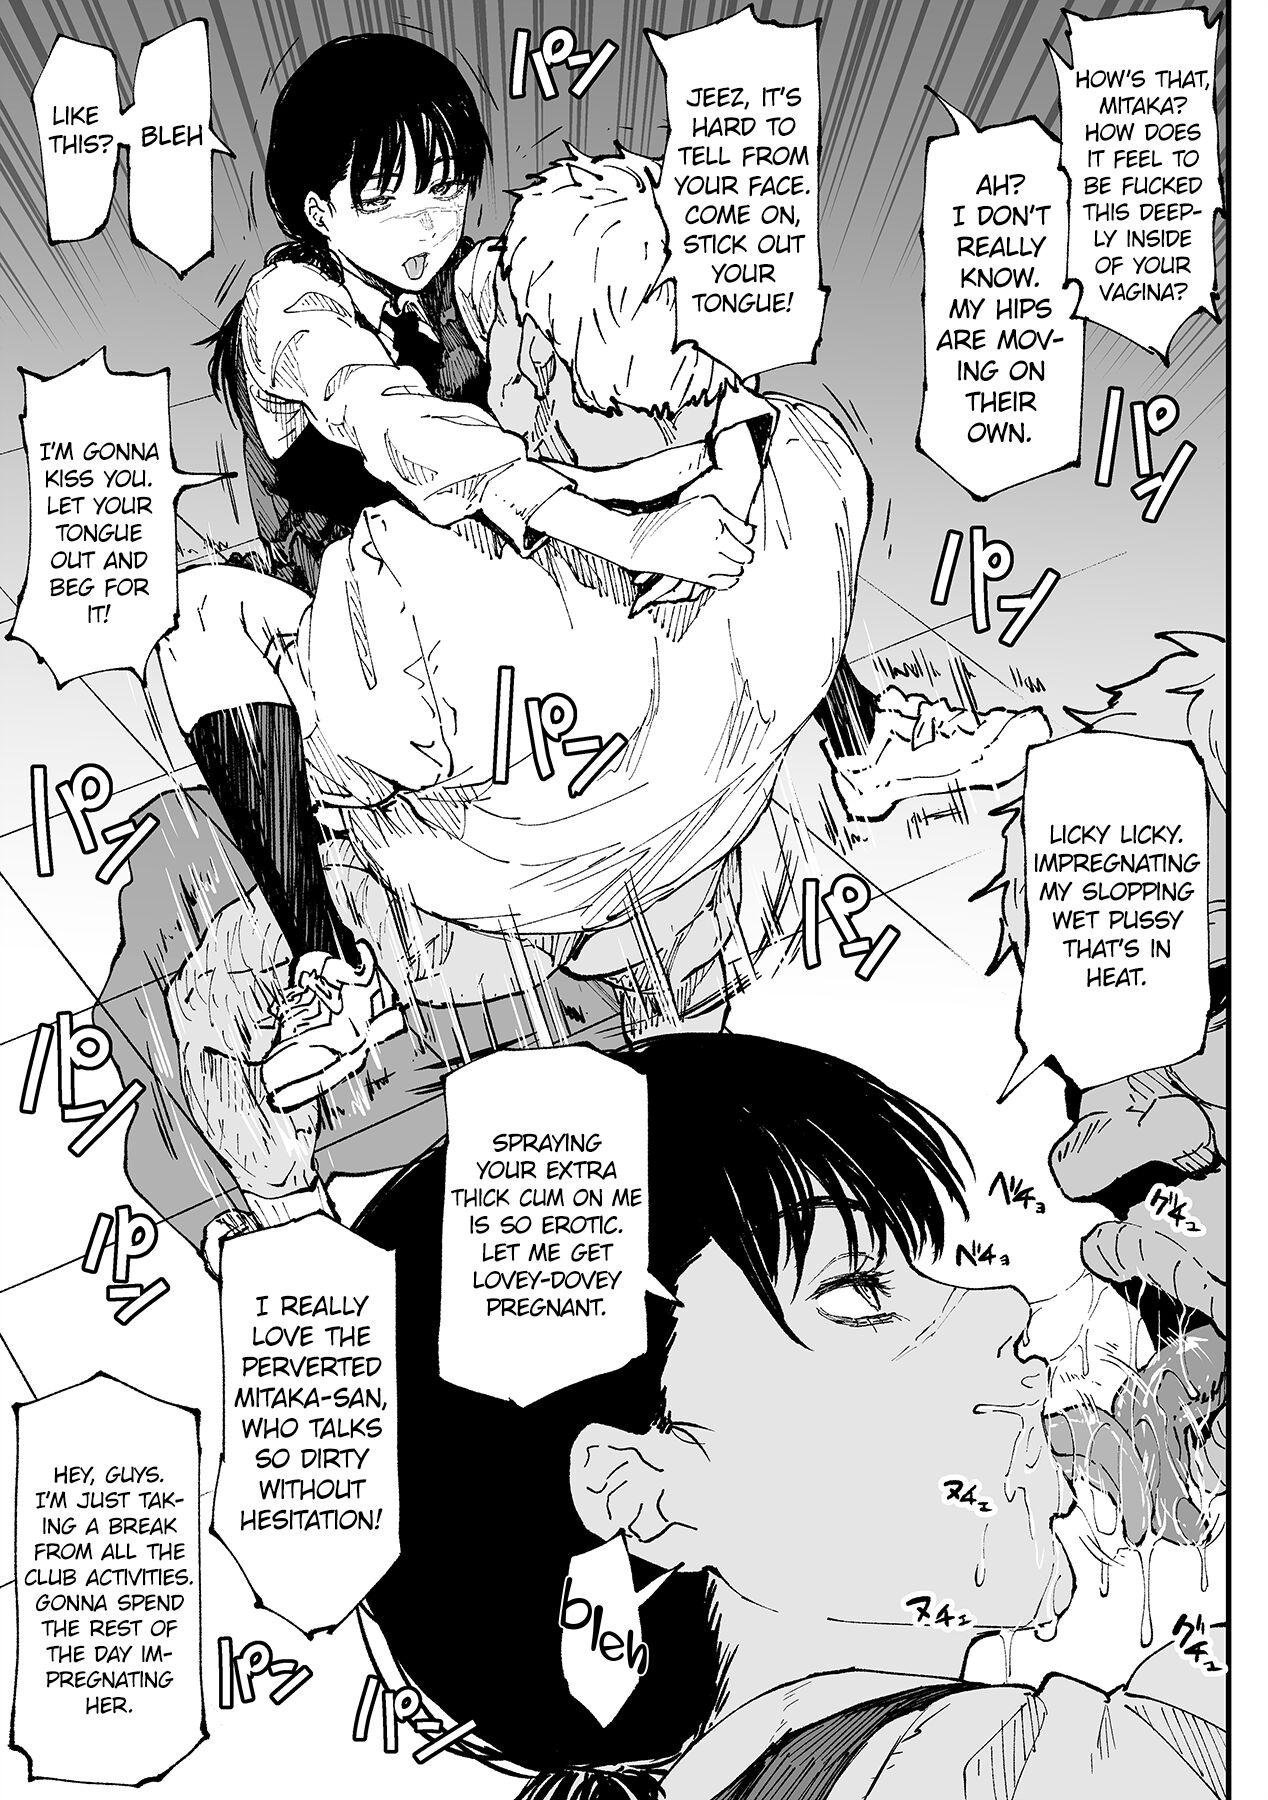 Venezolana Mitaka-san Does Her Best to Make you Hers - Chainsaw man Collar - Page 4